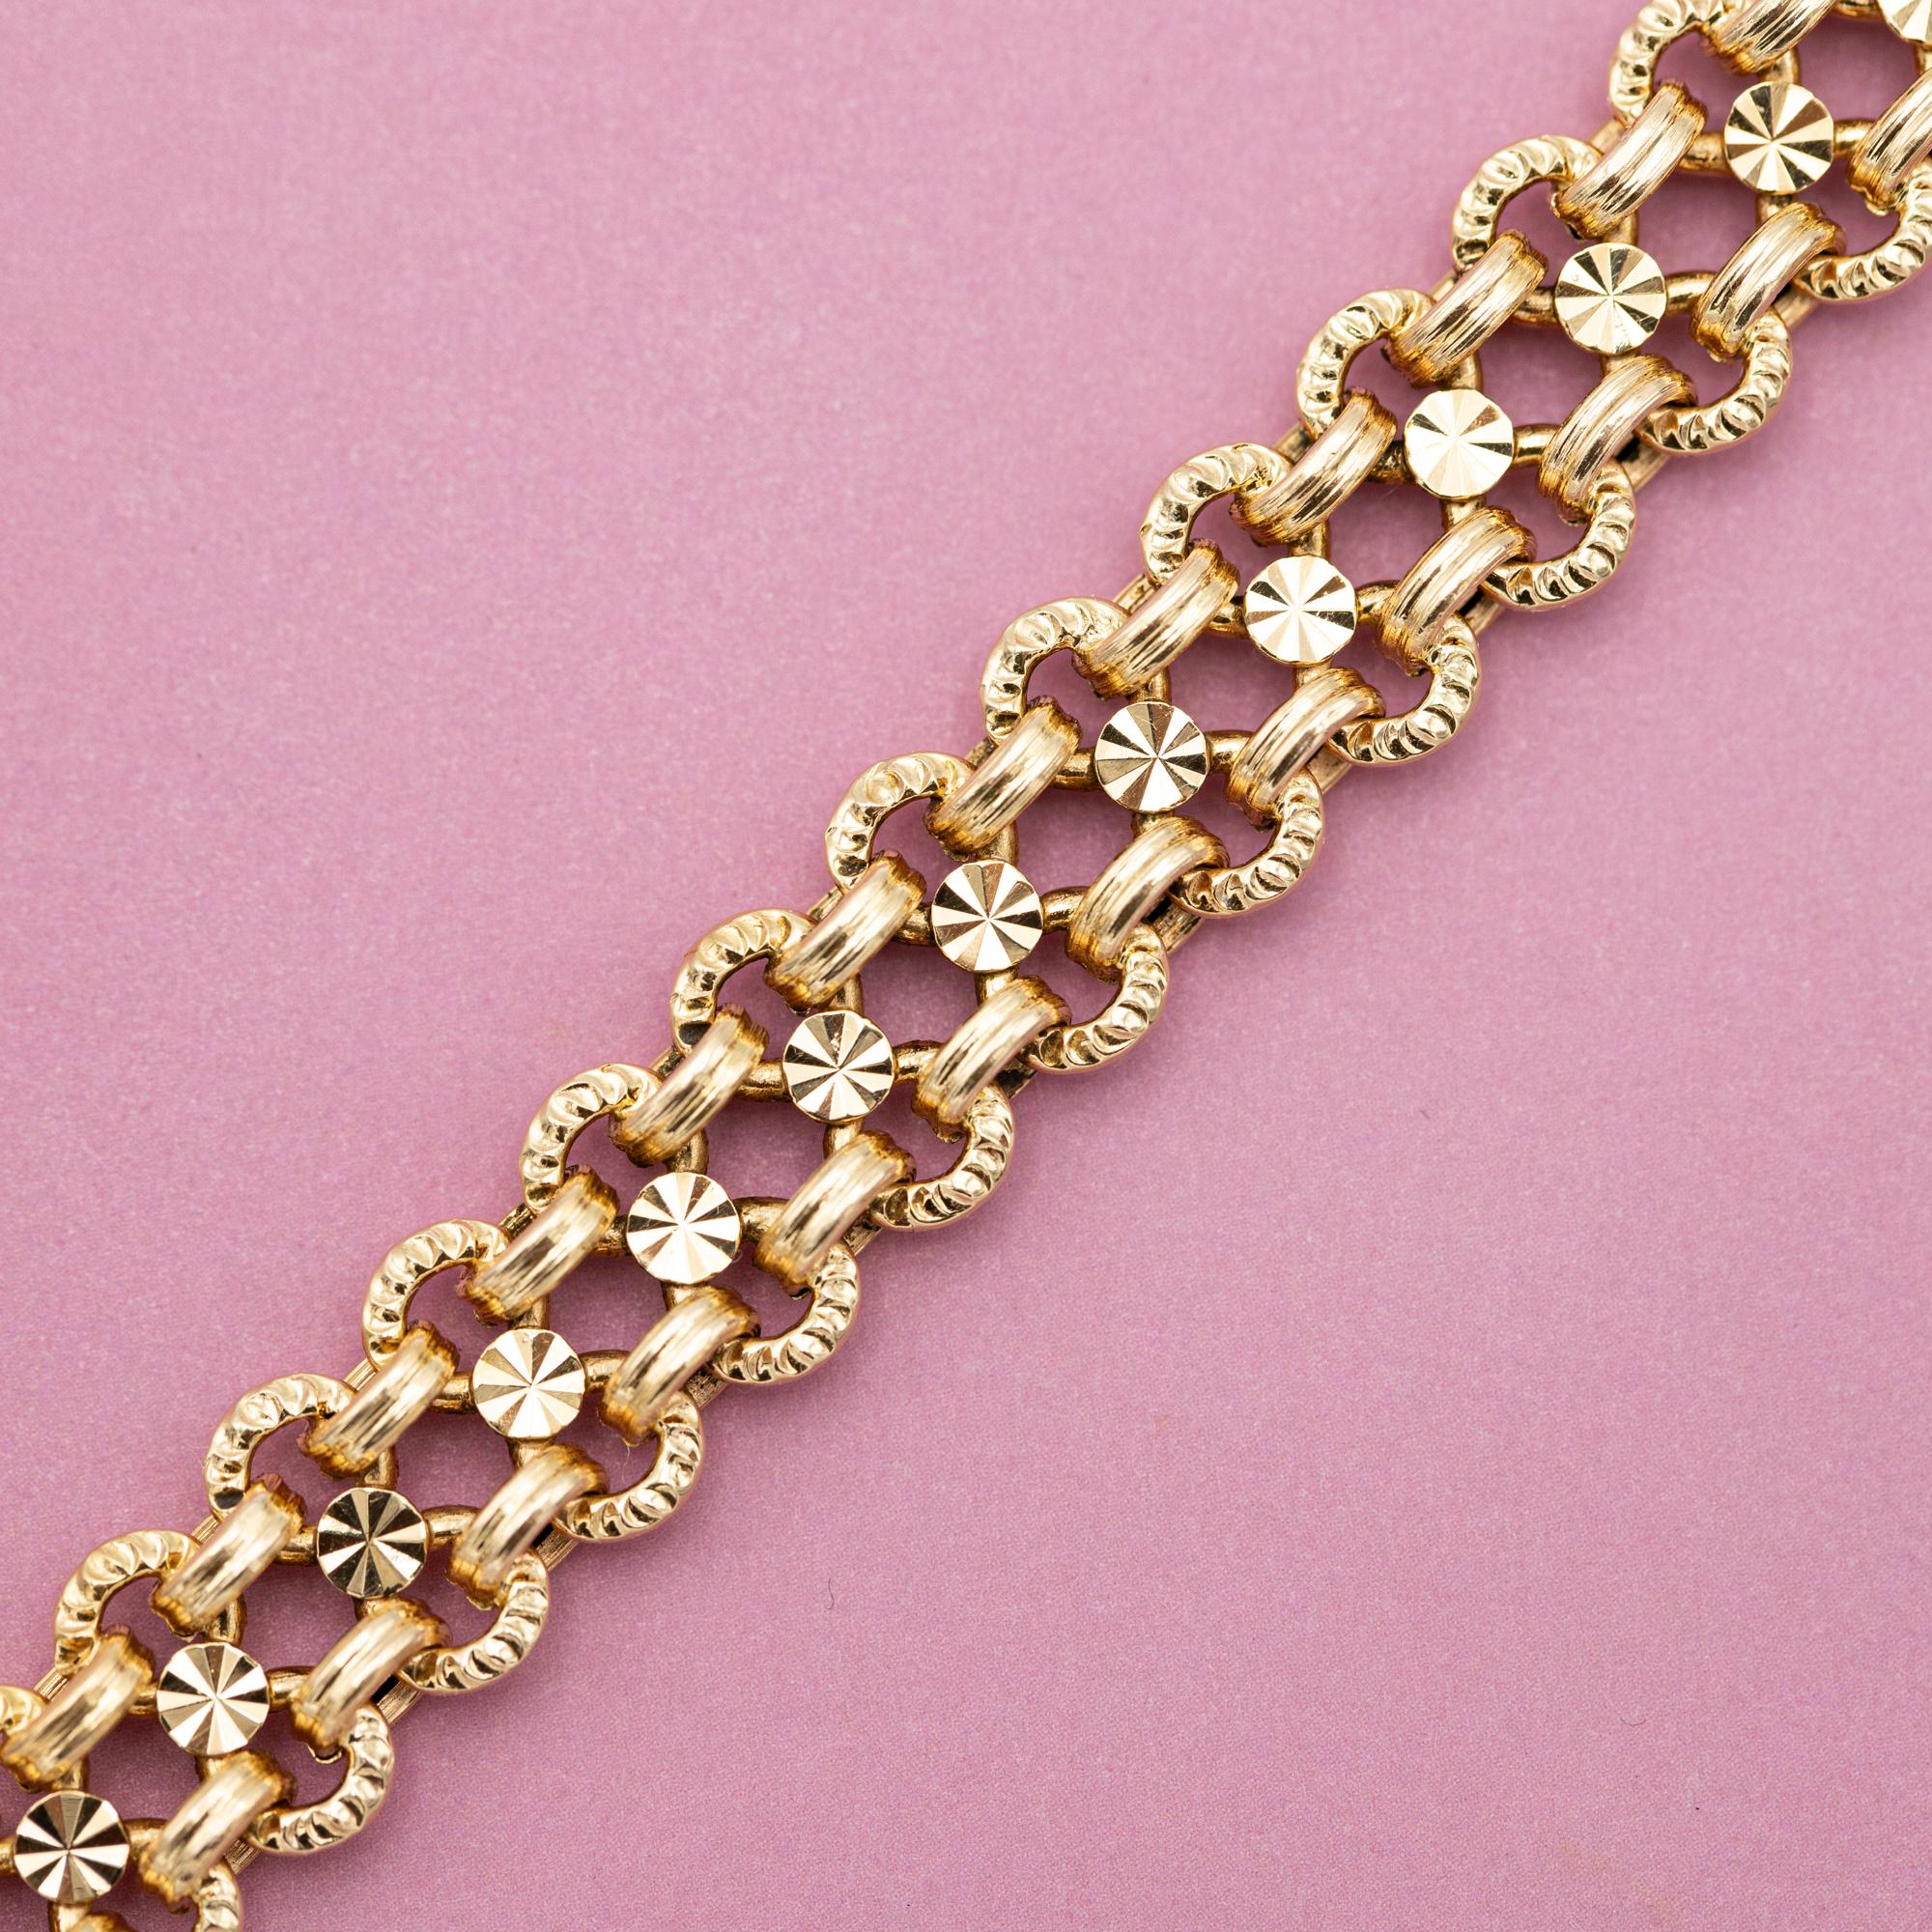 We are happy to introduce you to this wonderful 1940's bracelet which stole our hearts the moment we laid our eyes on her. This 18 ct pinkish yellow gold bracelet is very abundant decorated, on top of that, all decorations are very well detailled.